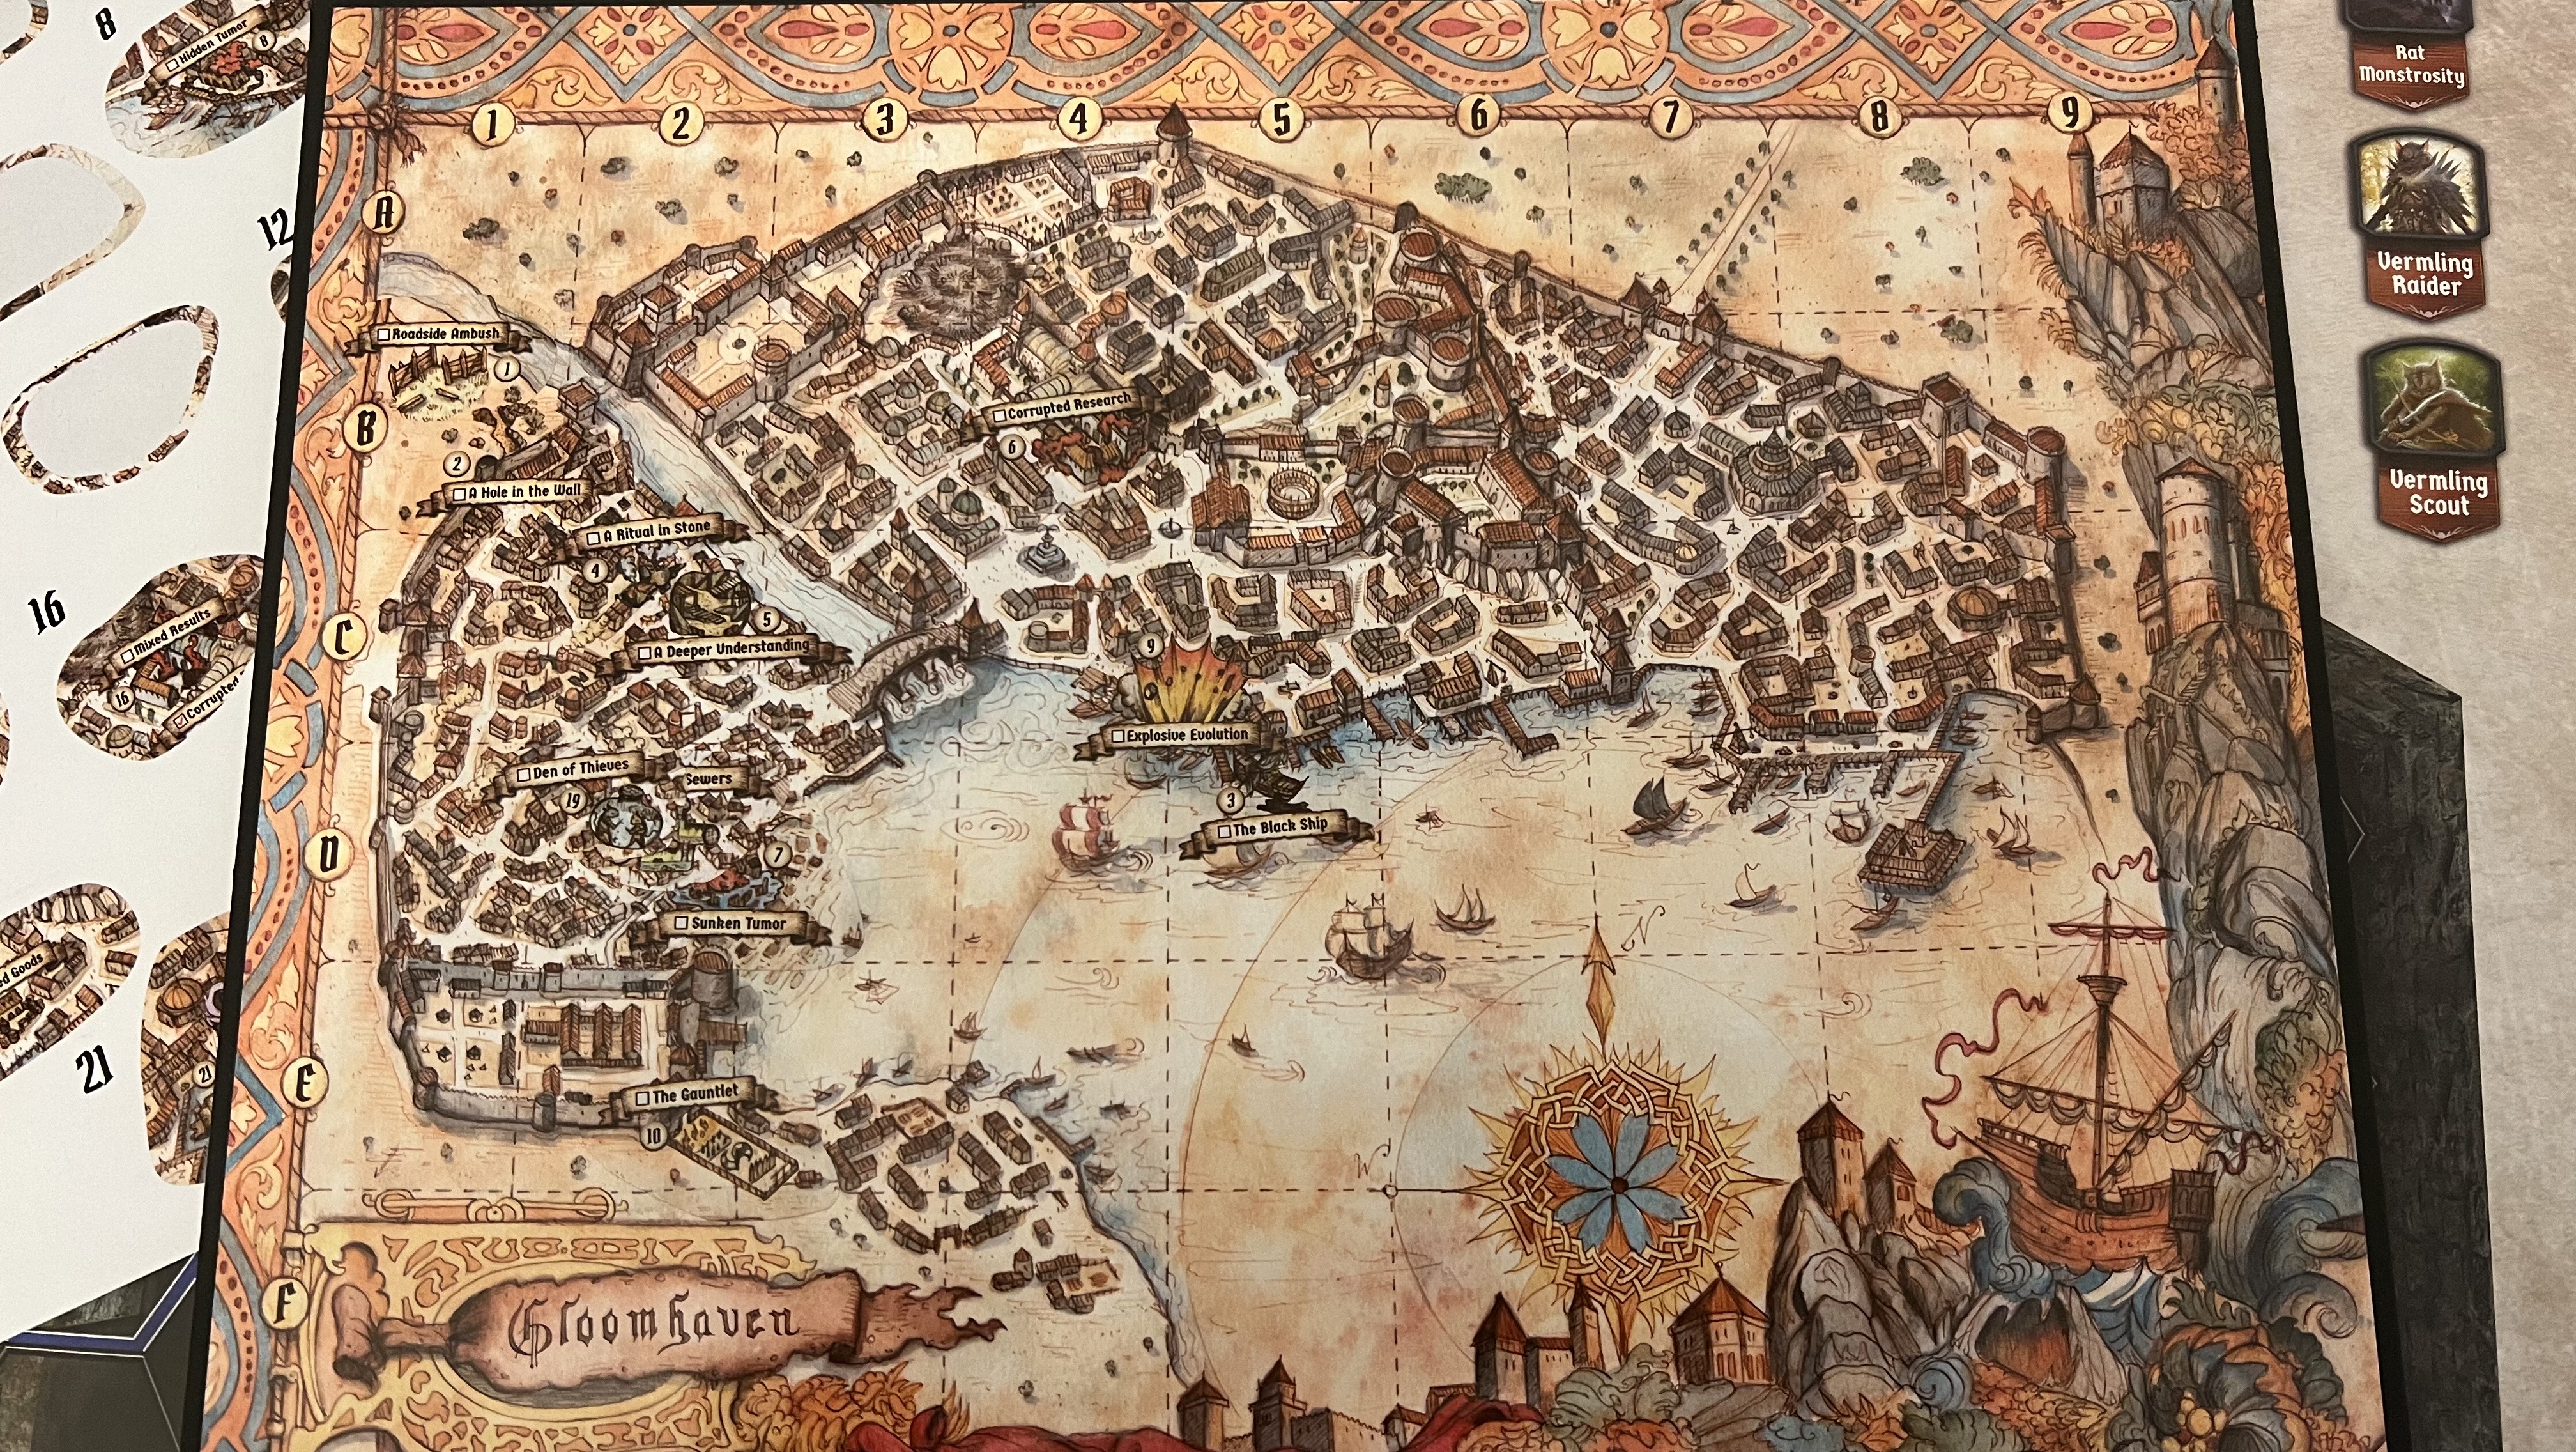 Gloomhaven: Jaws of the Lion map